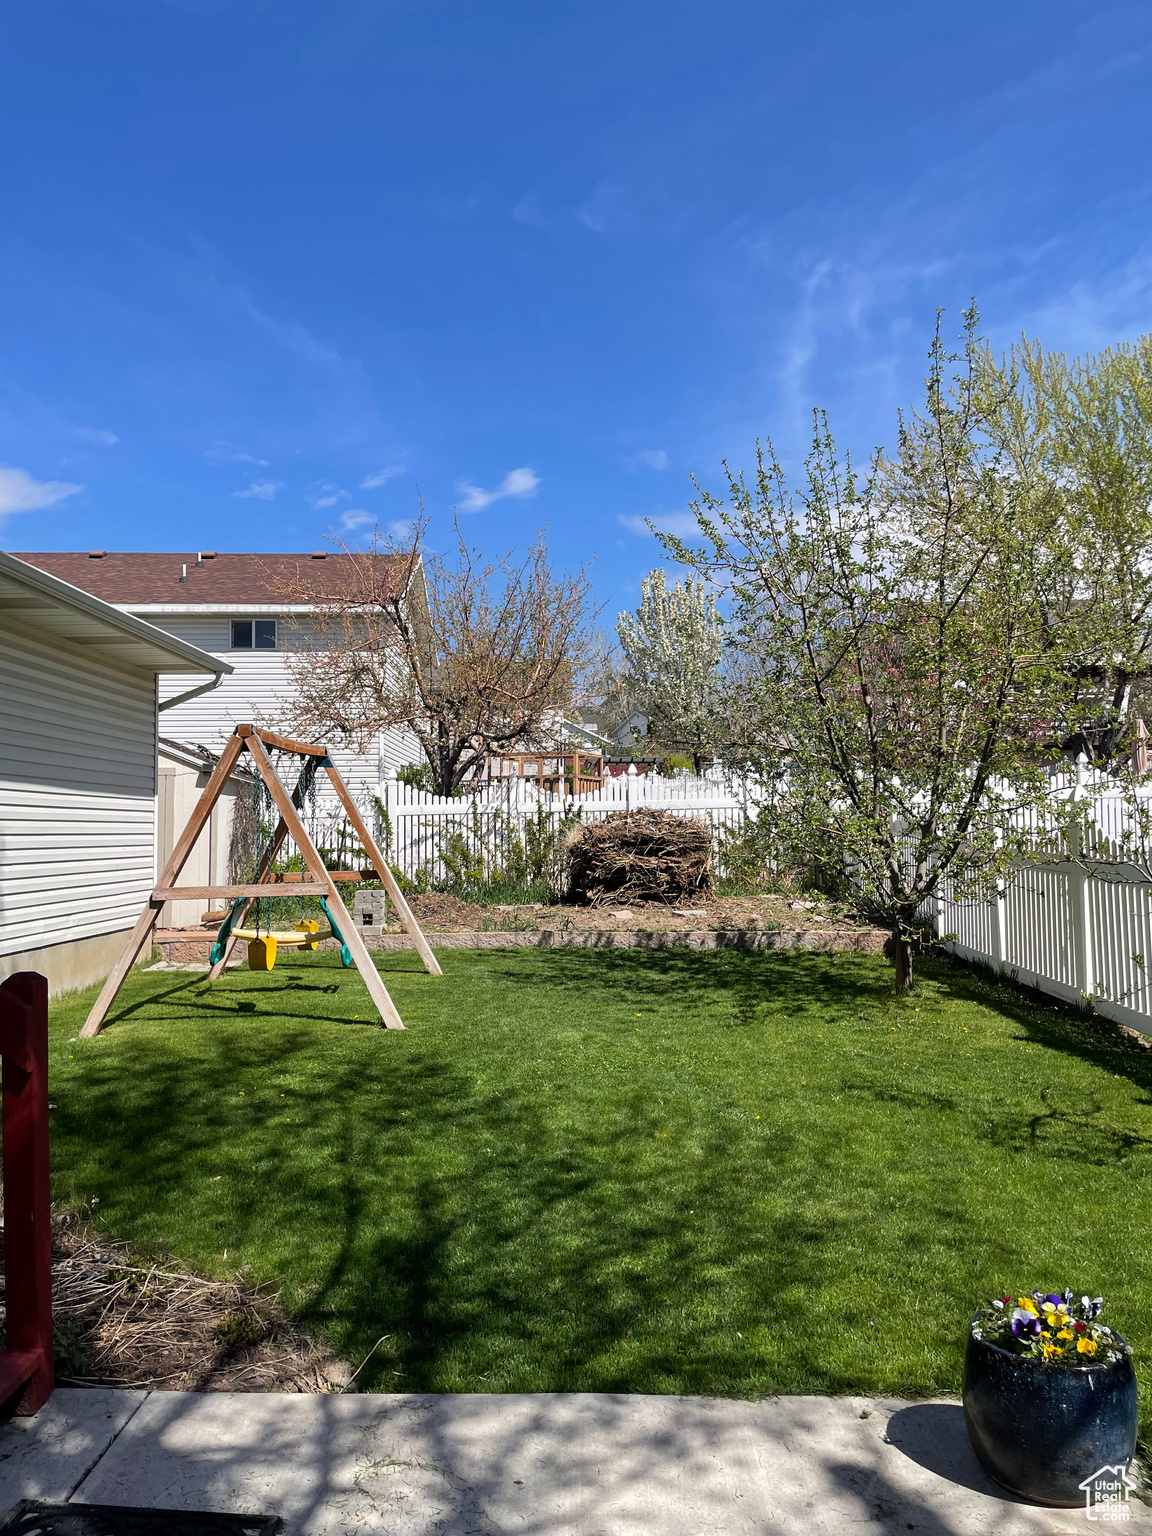 Backyard- garden, peach tree, swing set and shed pictured